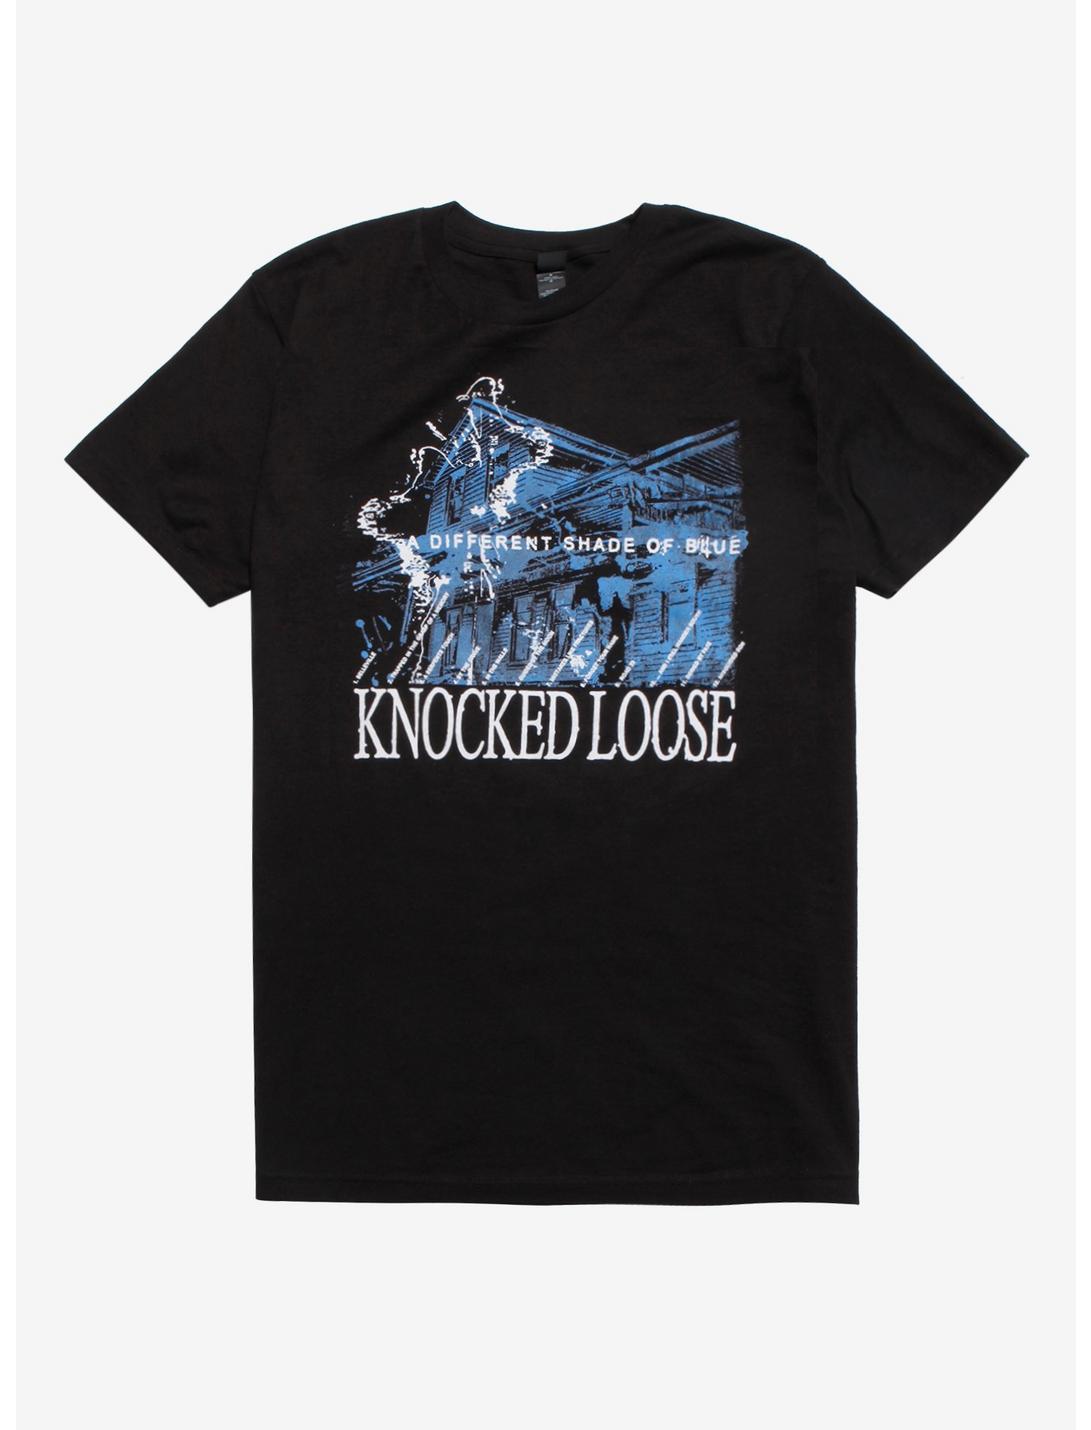 Knocked Loose A Different Shade Of Blue T-Shirt, BLACK, hi-res